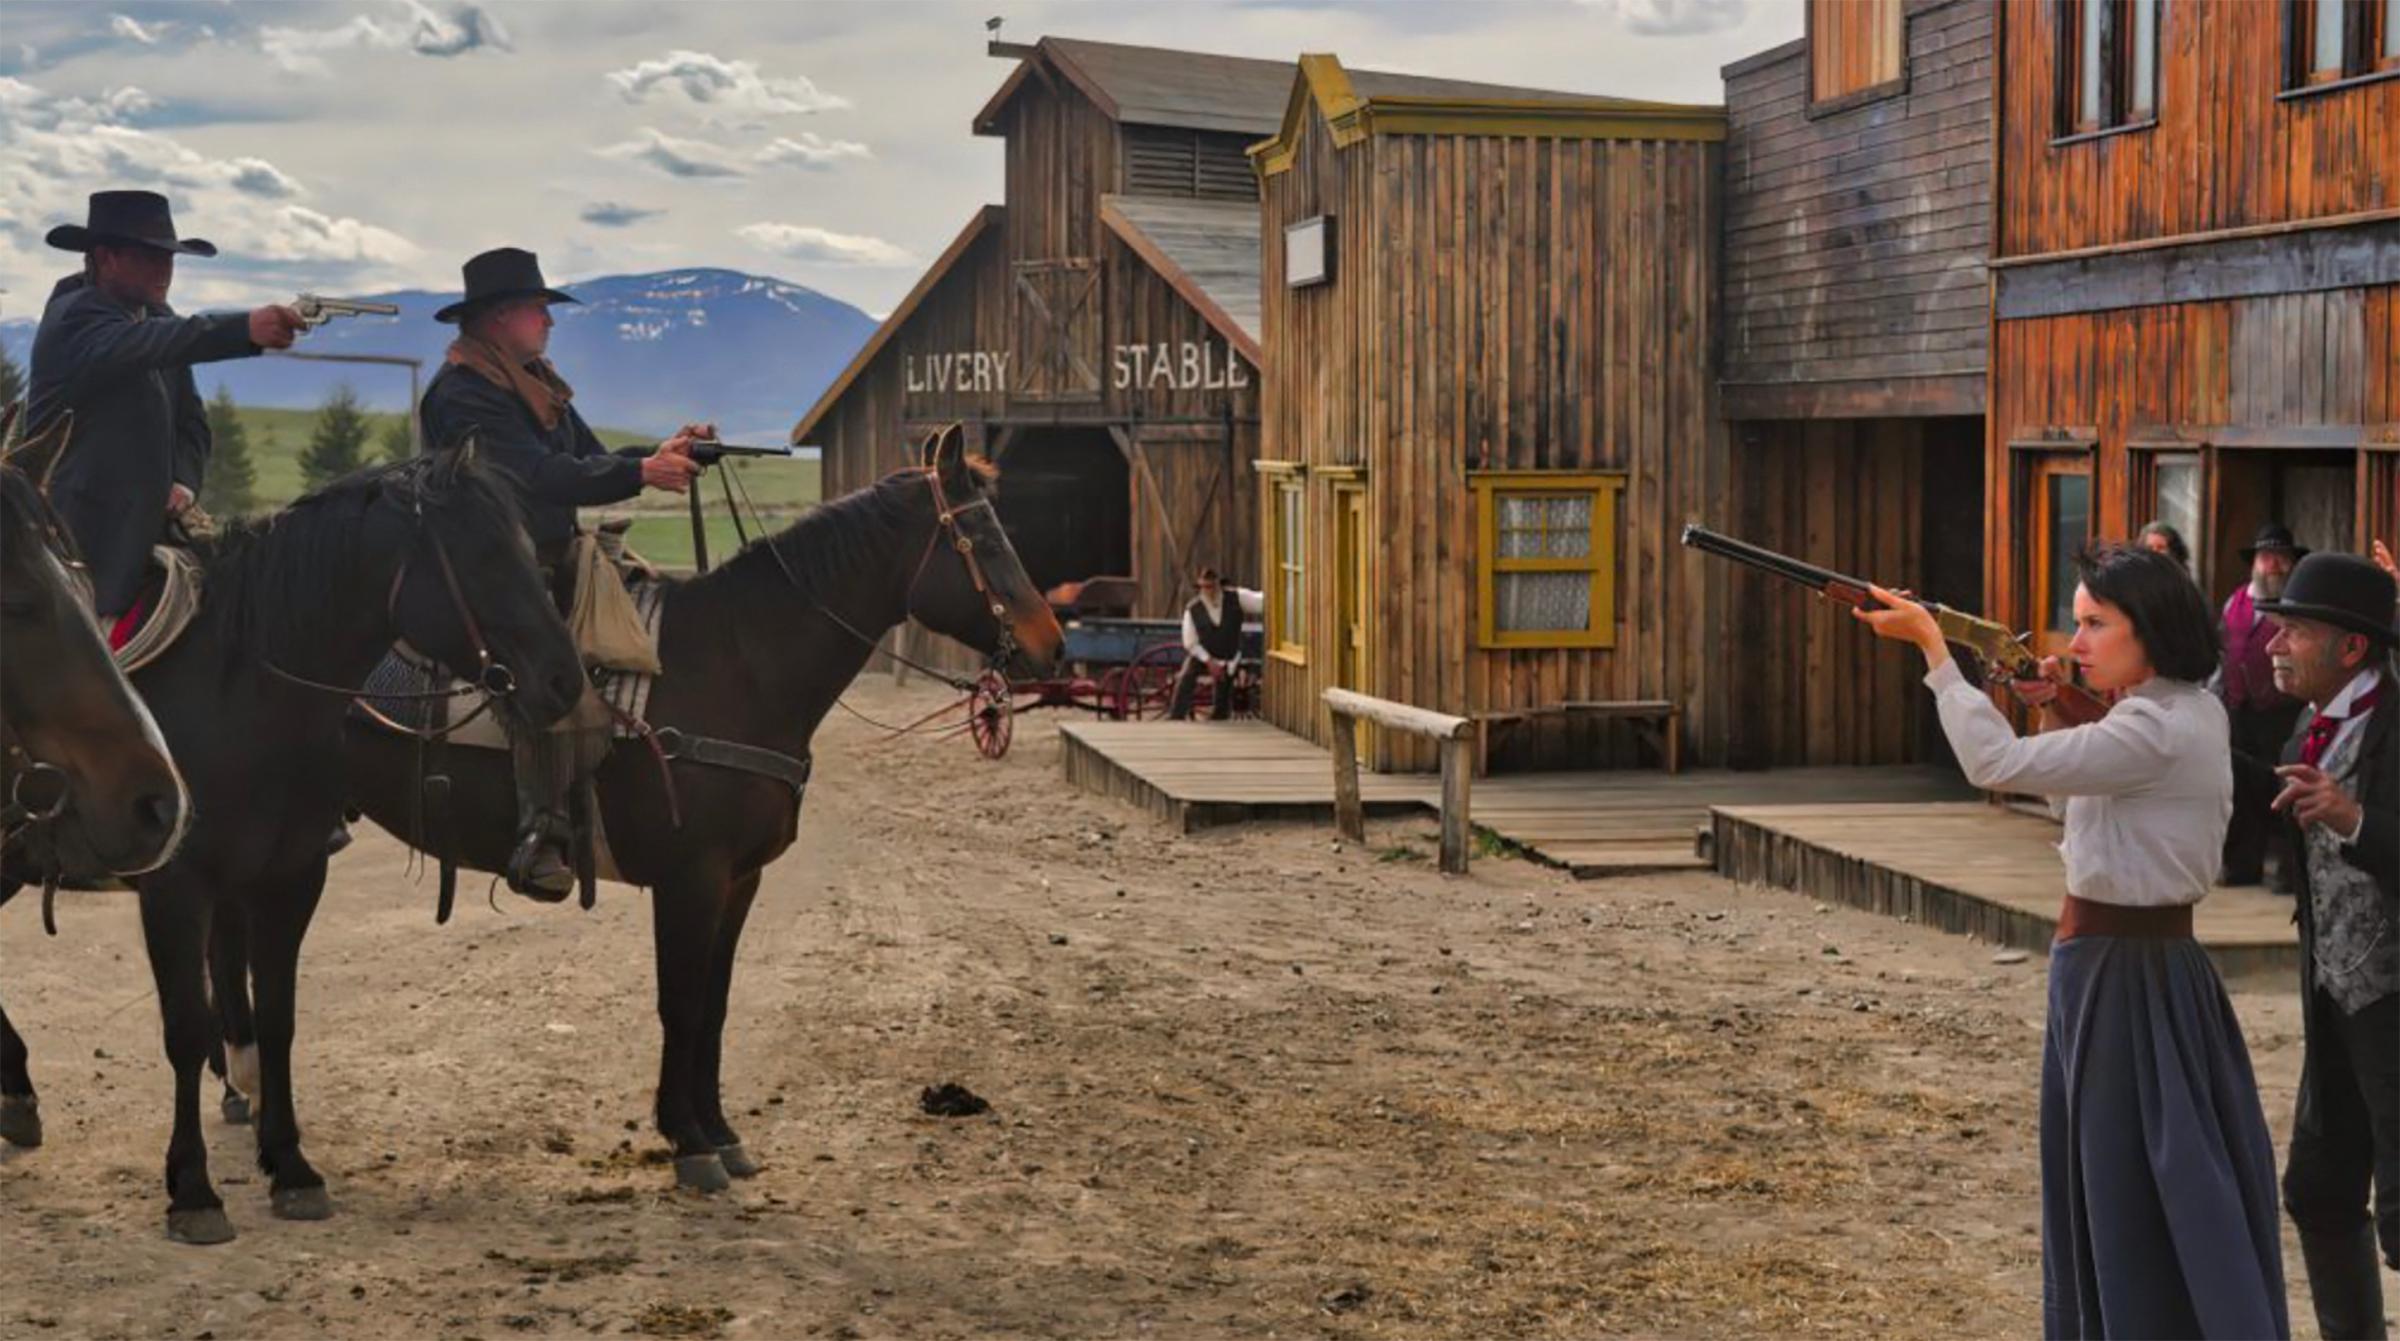 Alec Baldwin's 'Rust' movie production is set to resume filming at this scenic Montana ranch.